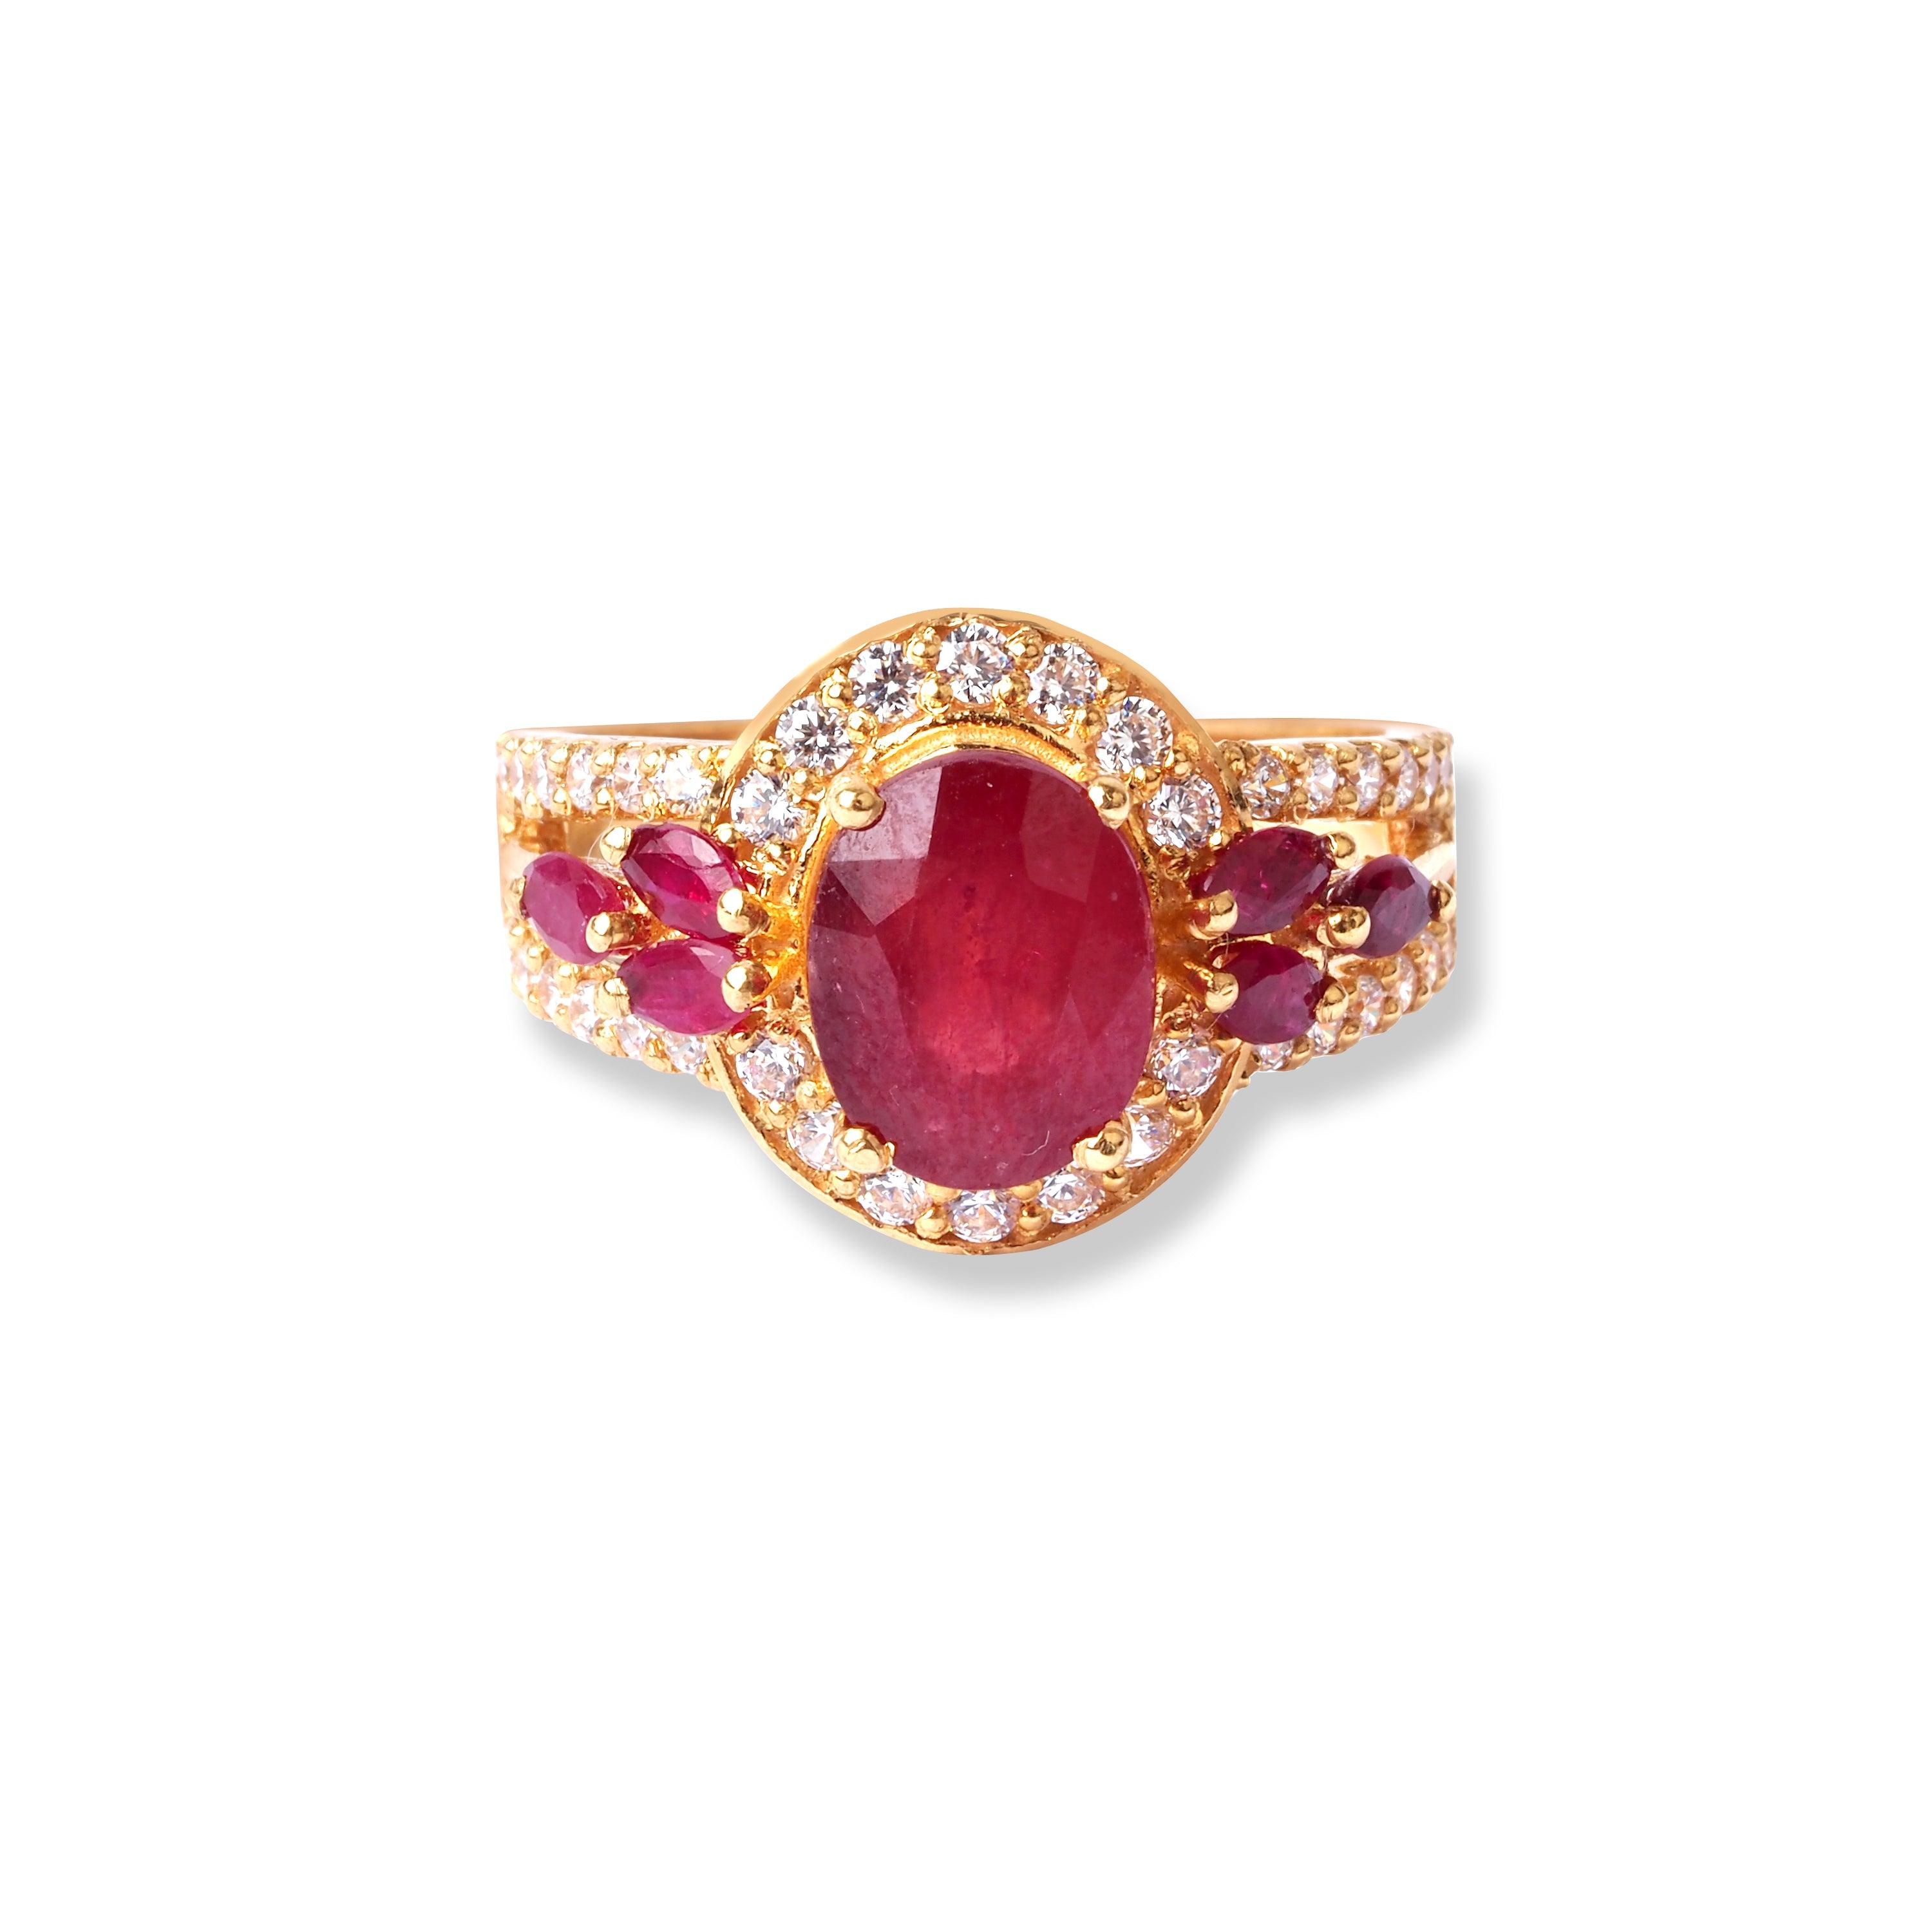 22ct Gold Ring With Red Stones & Cubic Zirconia Stones (6.5g) LR-6595 - Minar Jewellers